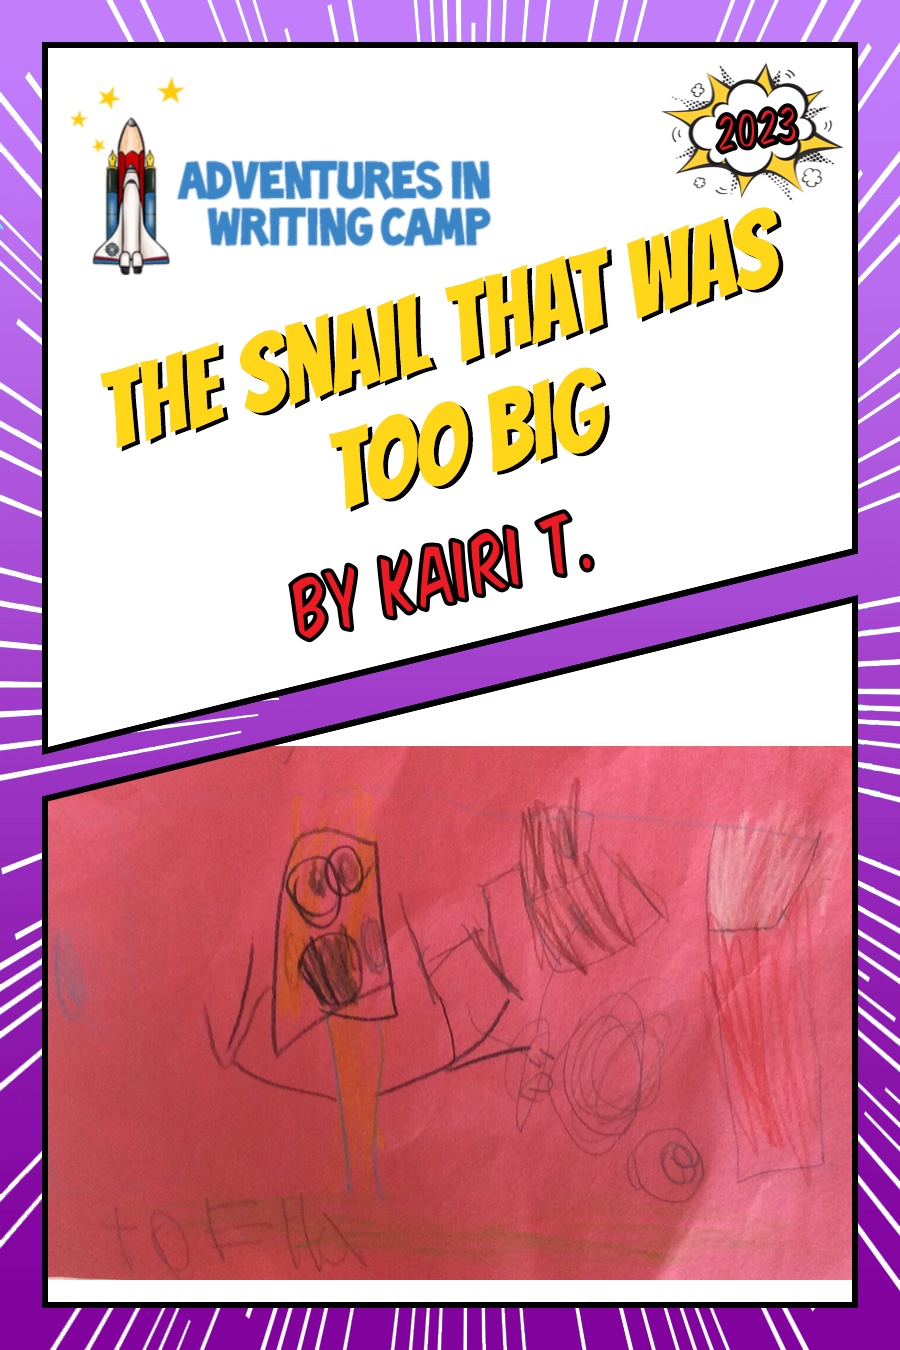 The Snail That Was Too Big by Kairi T